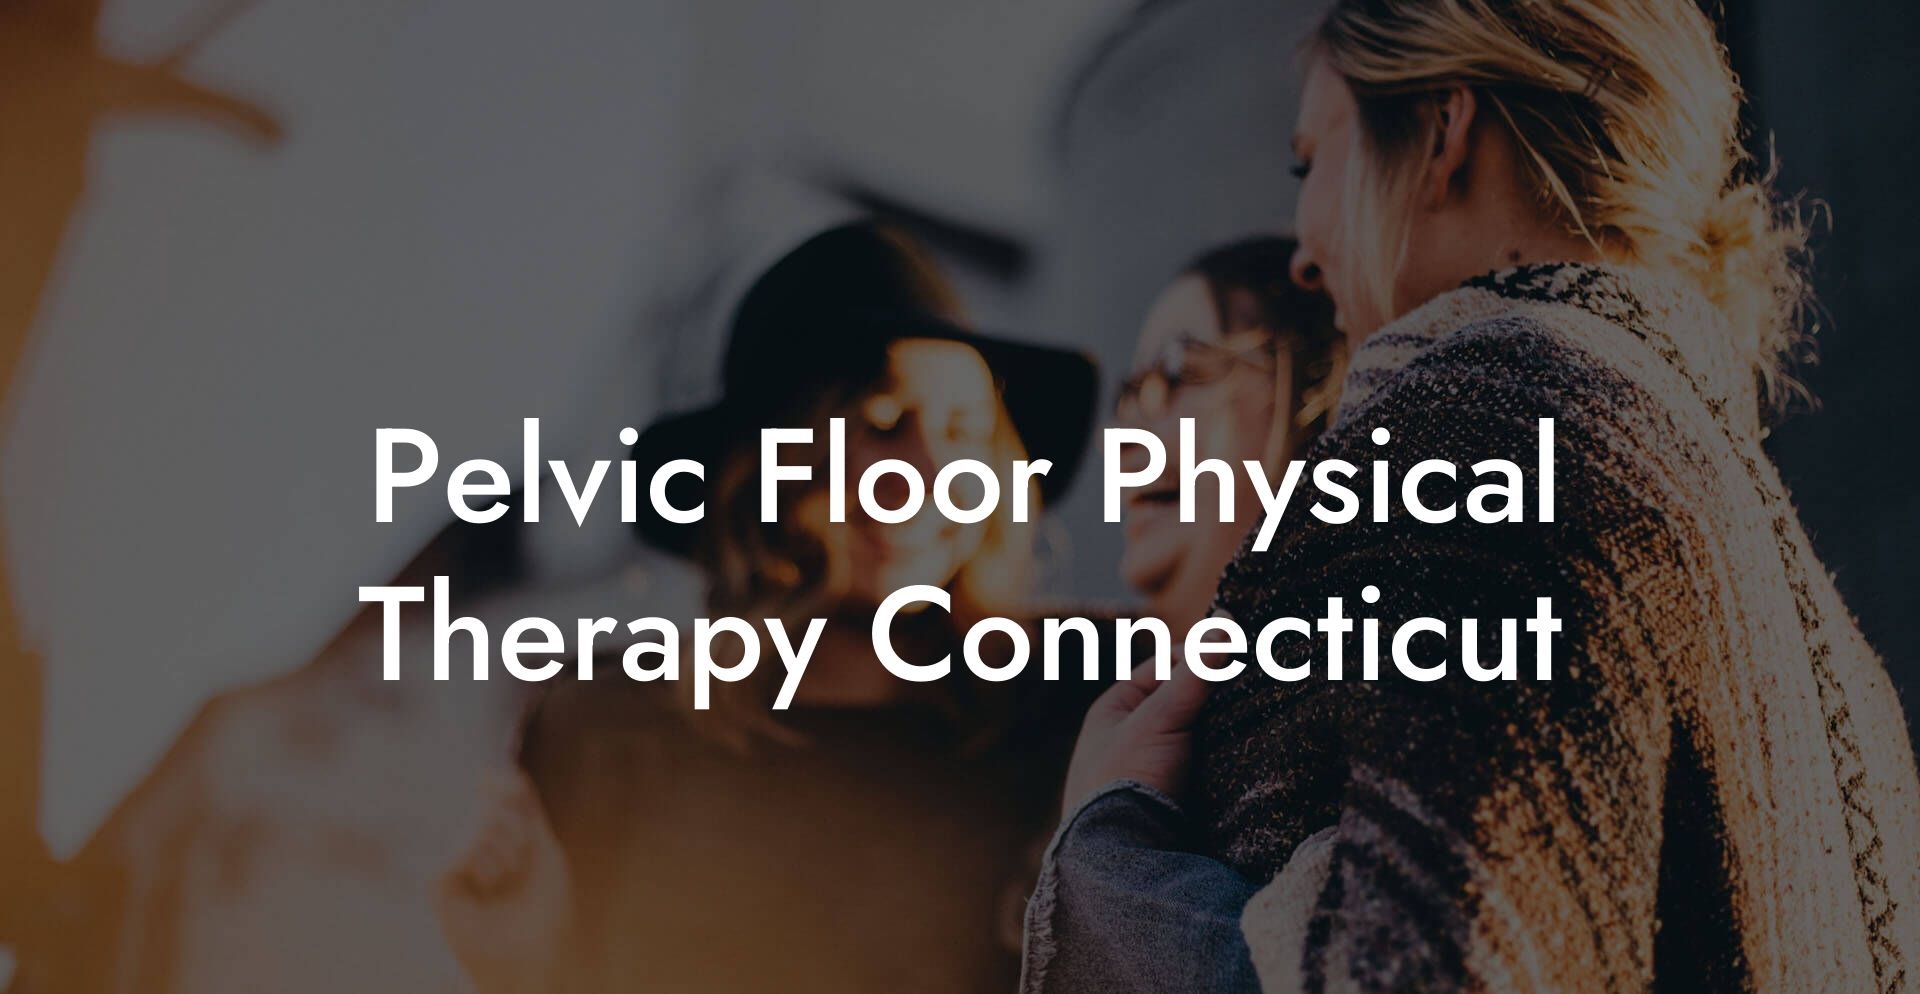 Pelvic Floor Physical Therapy Connecticut